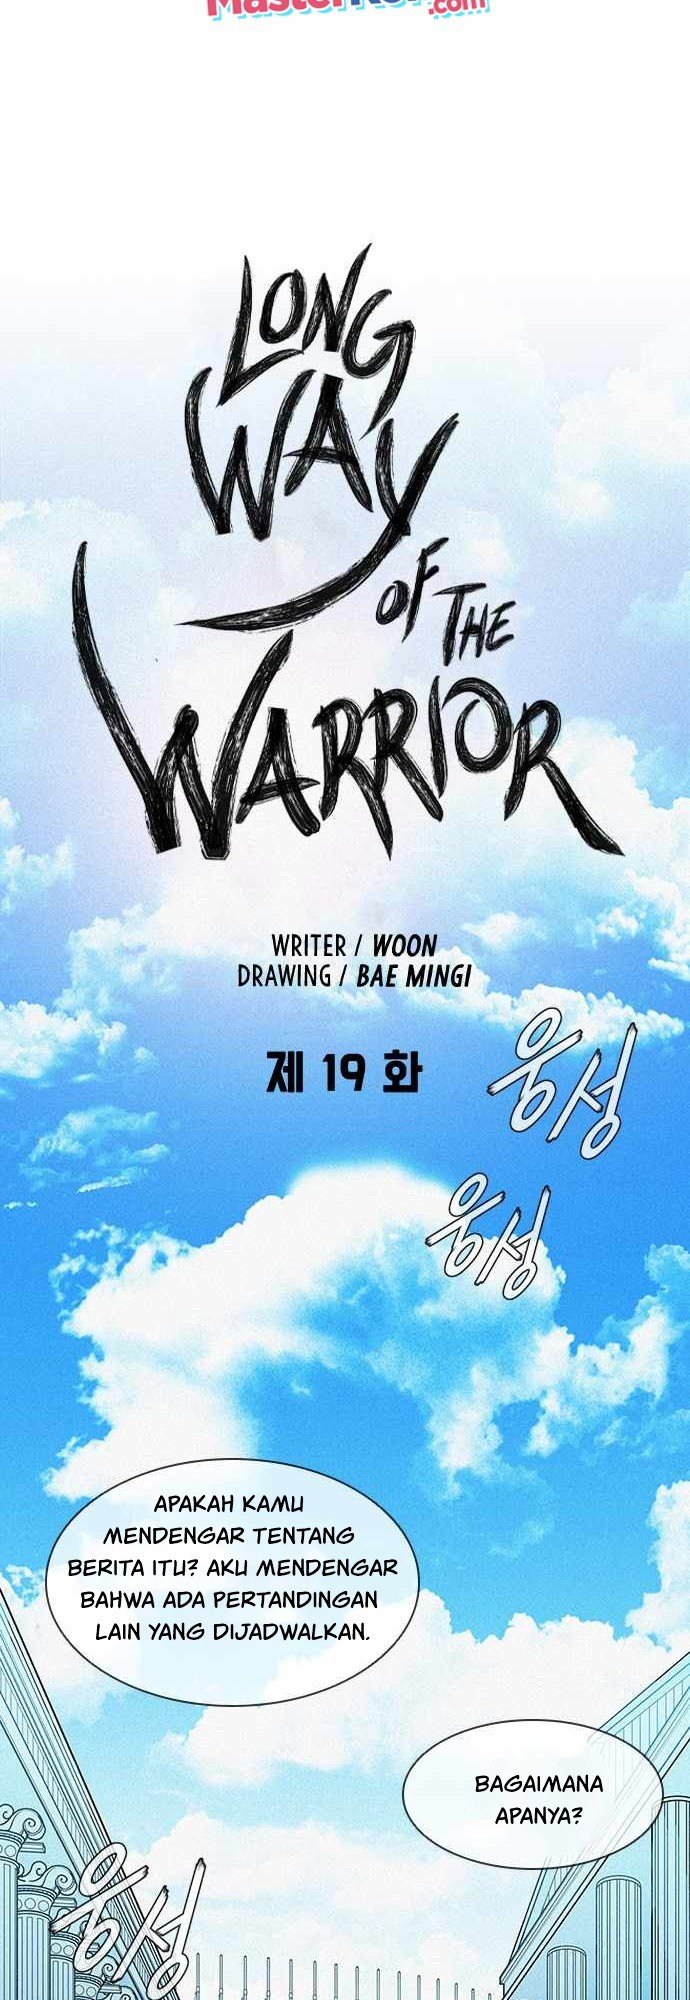 The Long Way of the Warrior Chapter 19